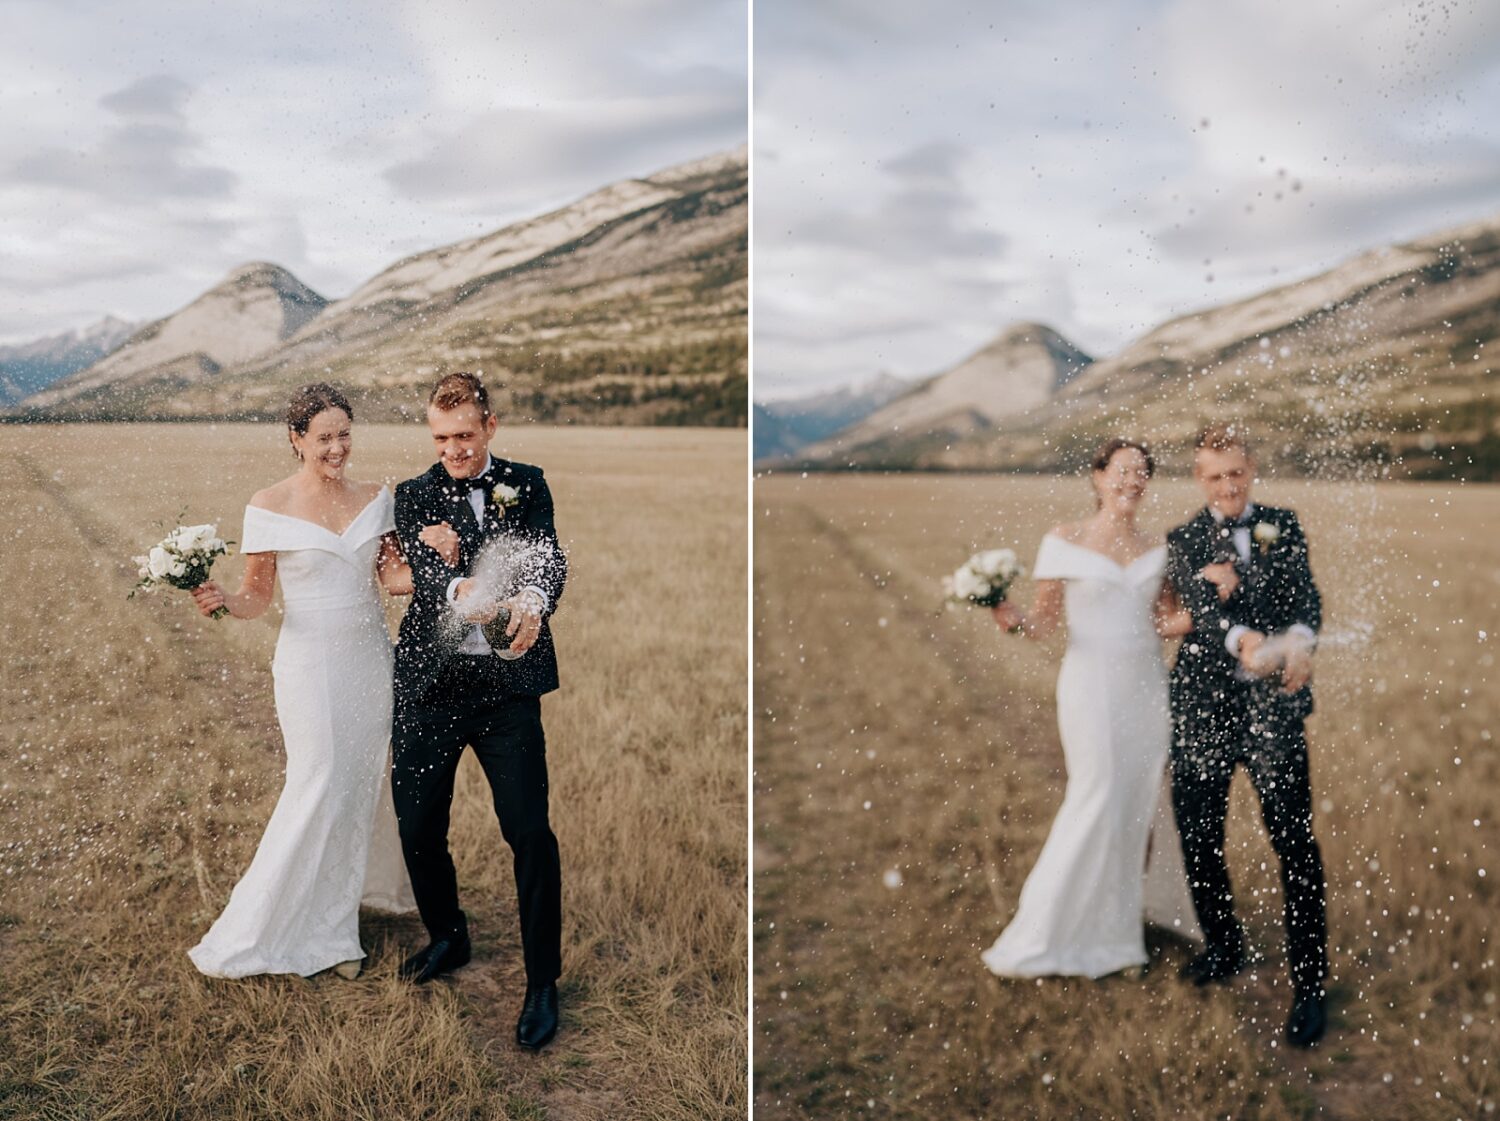 Jasper elopement photographer. Portraits of bride and groom doing a champagne spray in a field with mountains in the background.